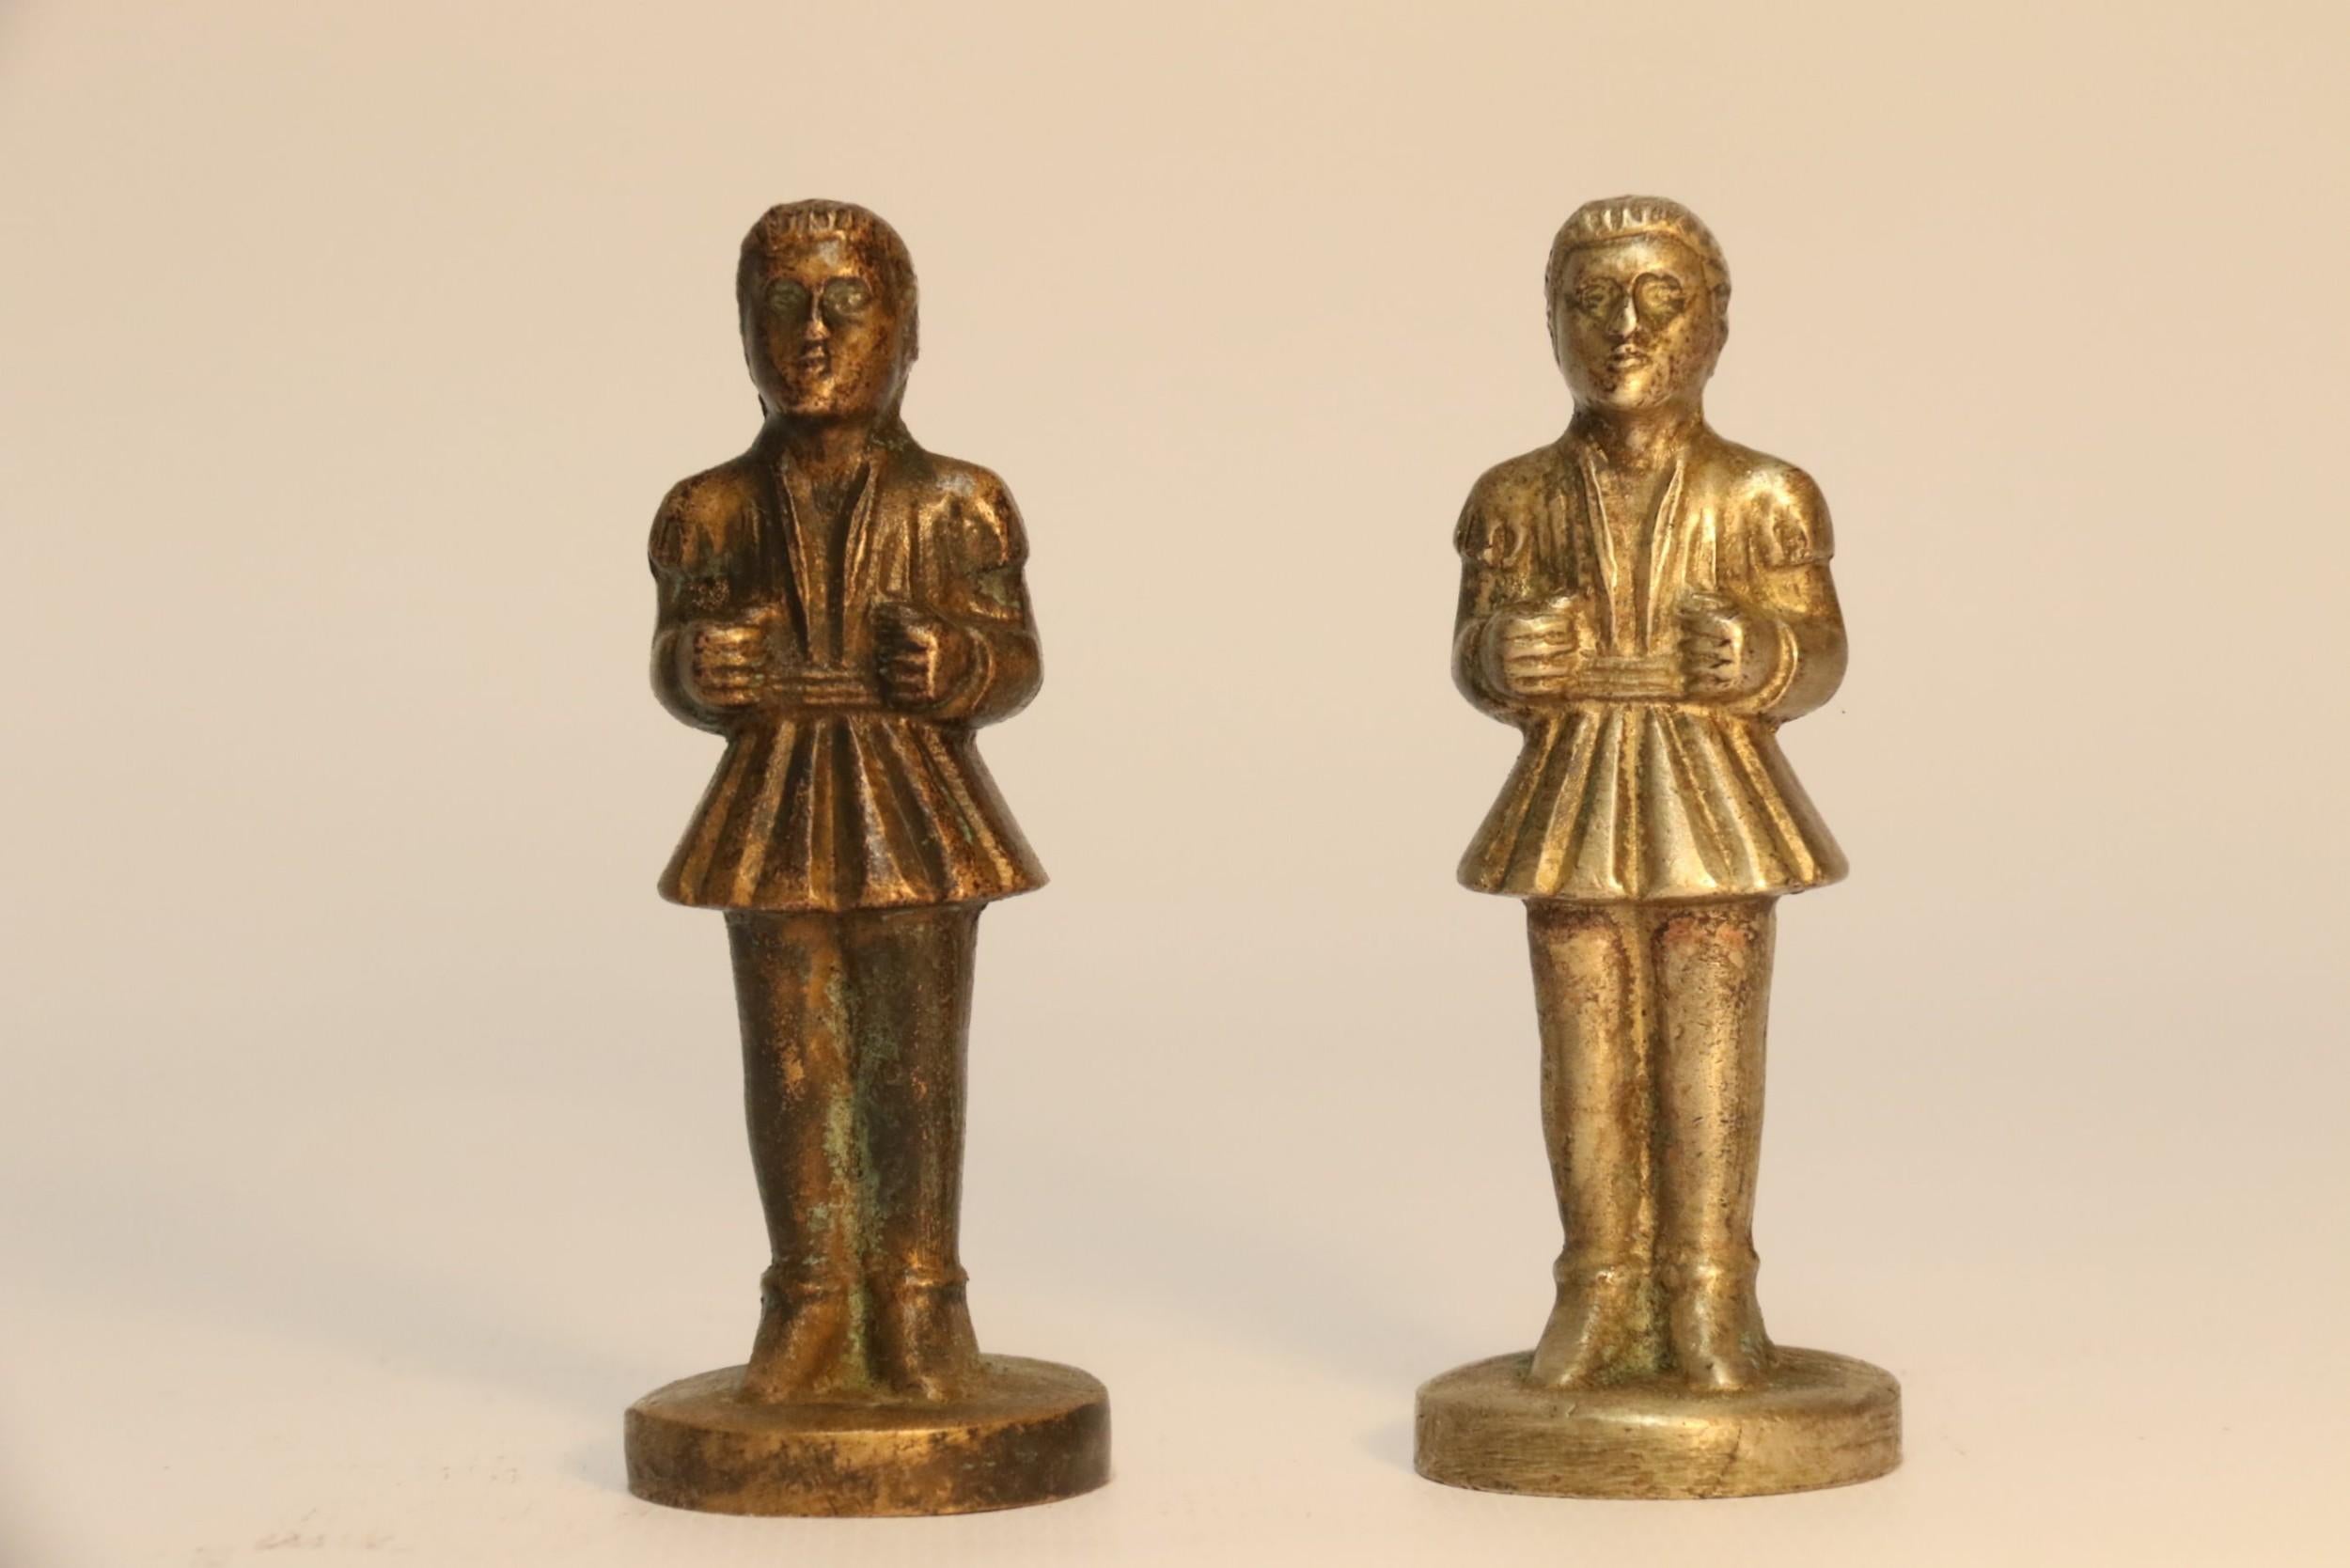 Novelty Heavy Cast Nickel and Bronze Chess Set Modeled on Medieval Figures For Sale 5